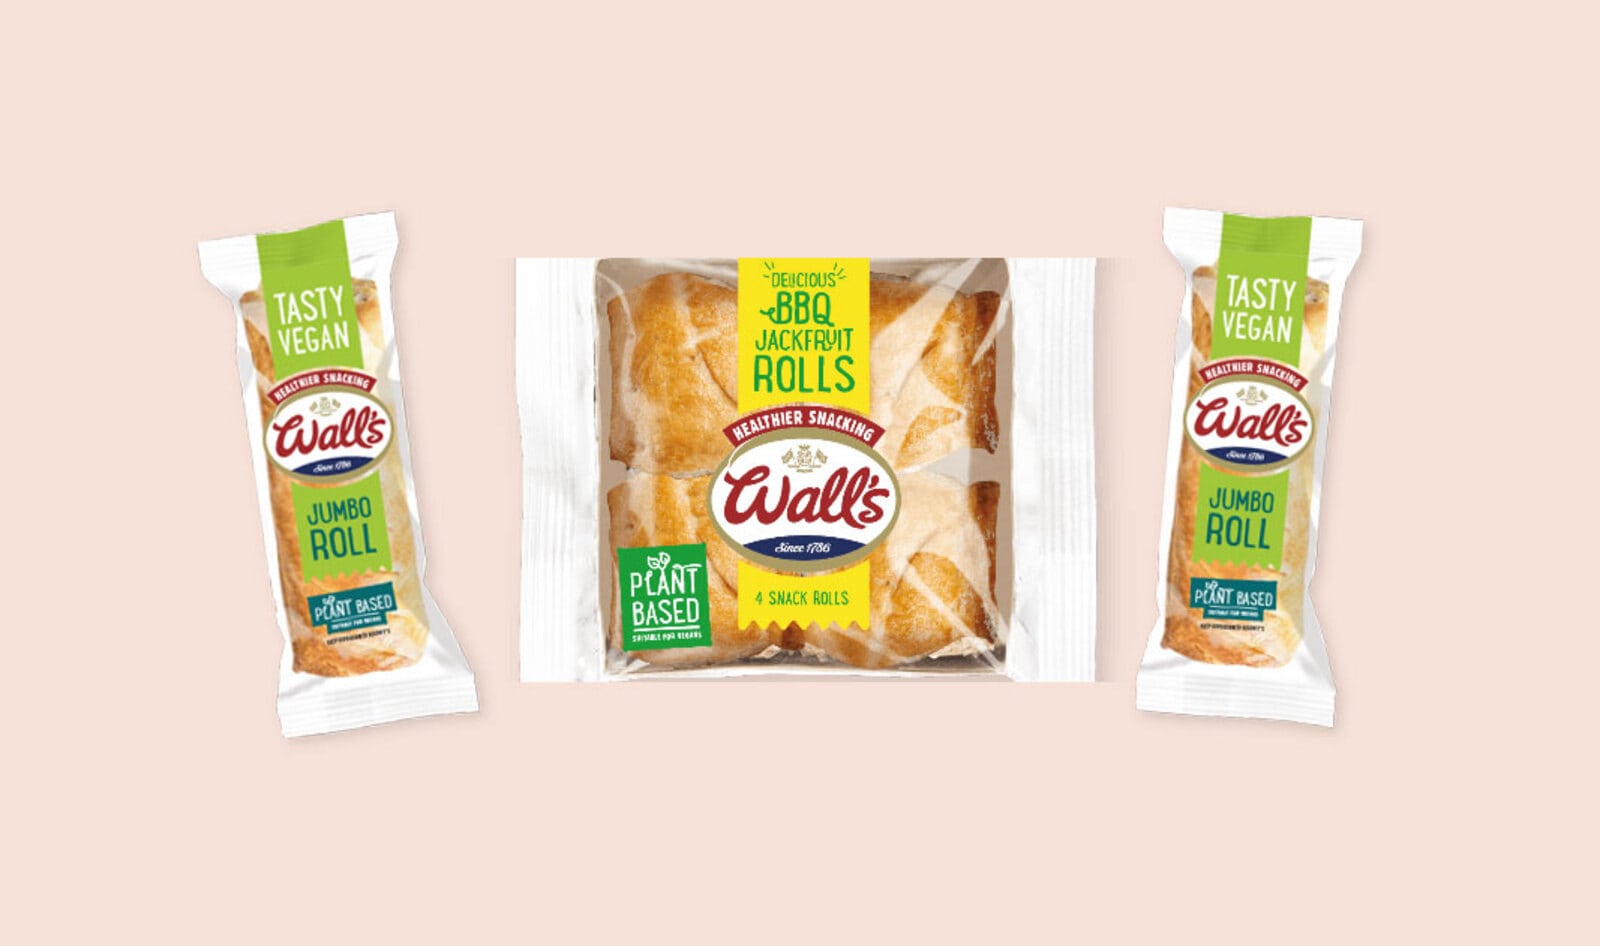 233-Year-Old British Brand Debuts Its First Line of Vegan Sausage Rolls